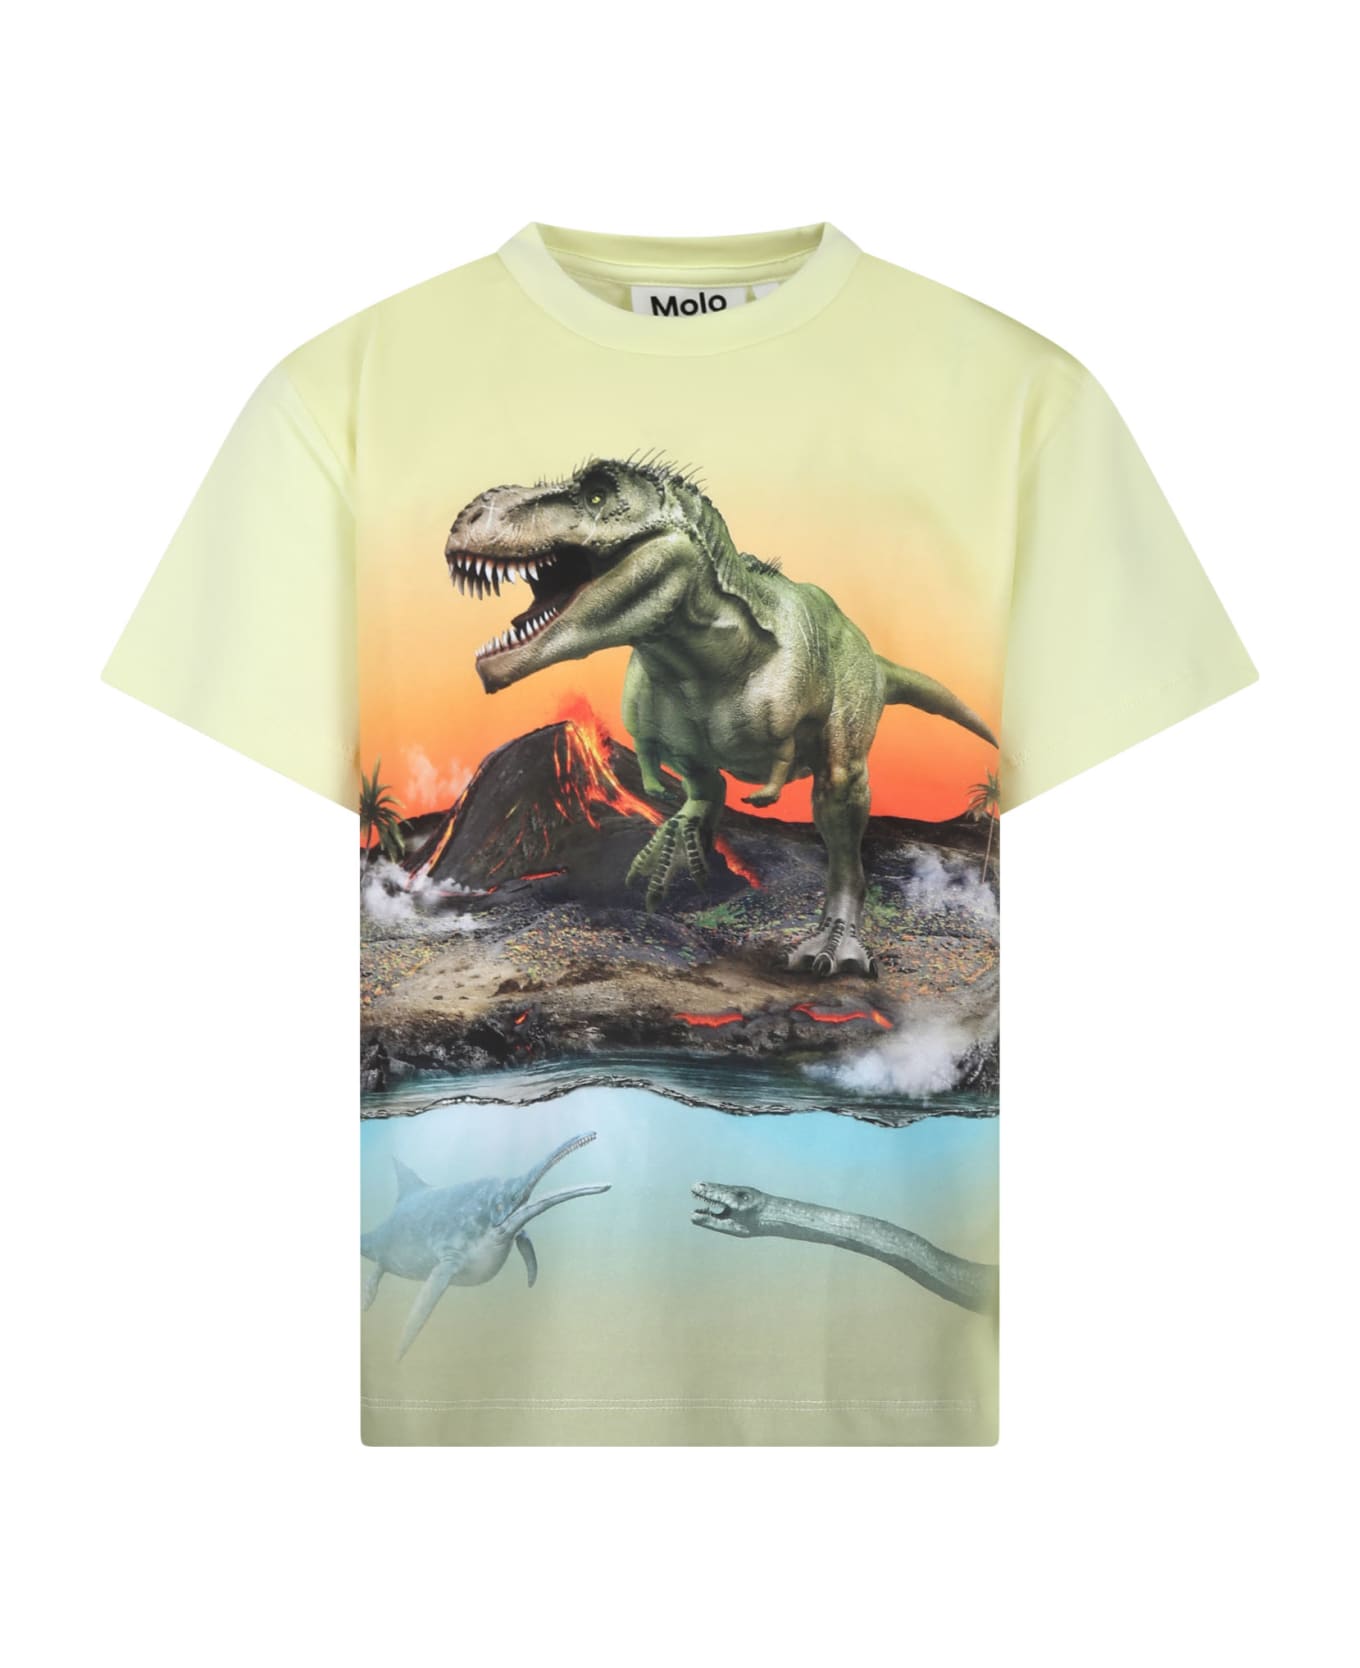 Molo Yellow T-shirt For Boy With Dinosaur Print - Yellow